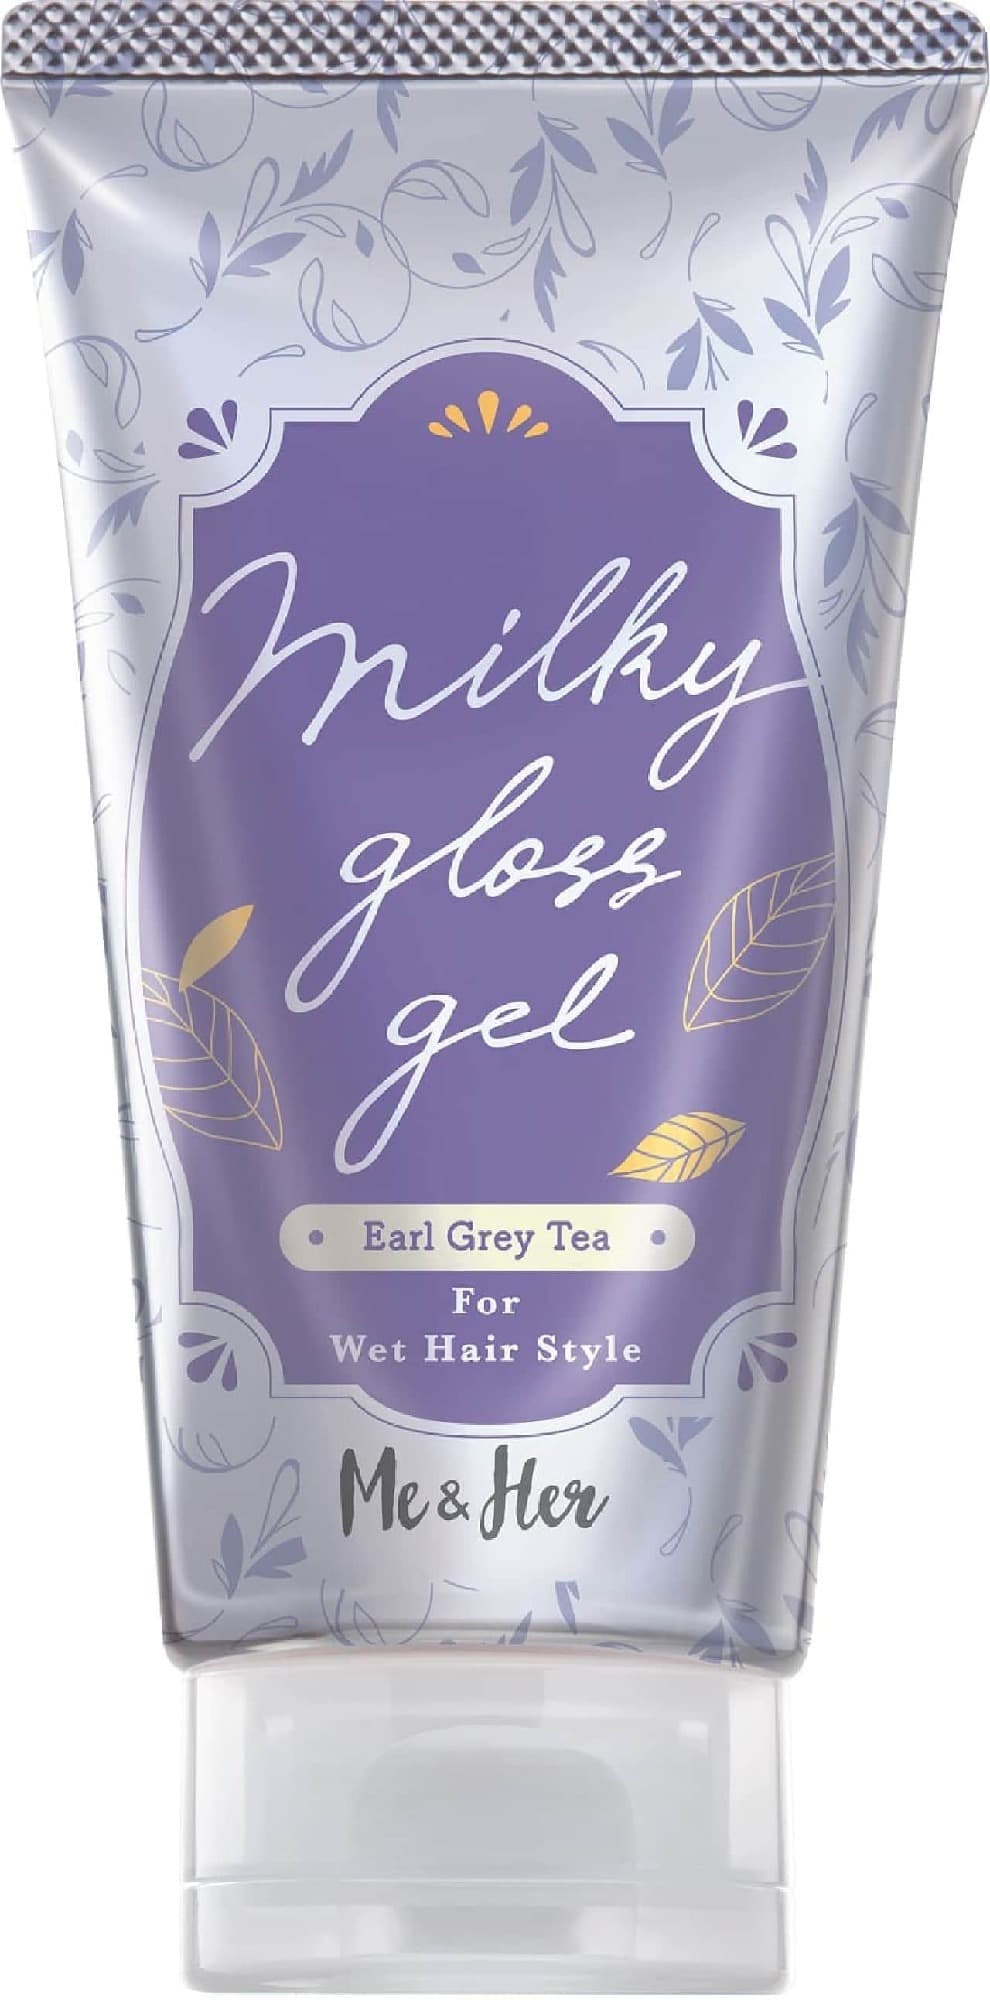 Earl Grey Tea" scent from utena's "Me and Her Milky Gloss Gel